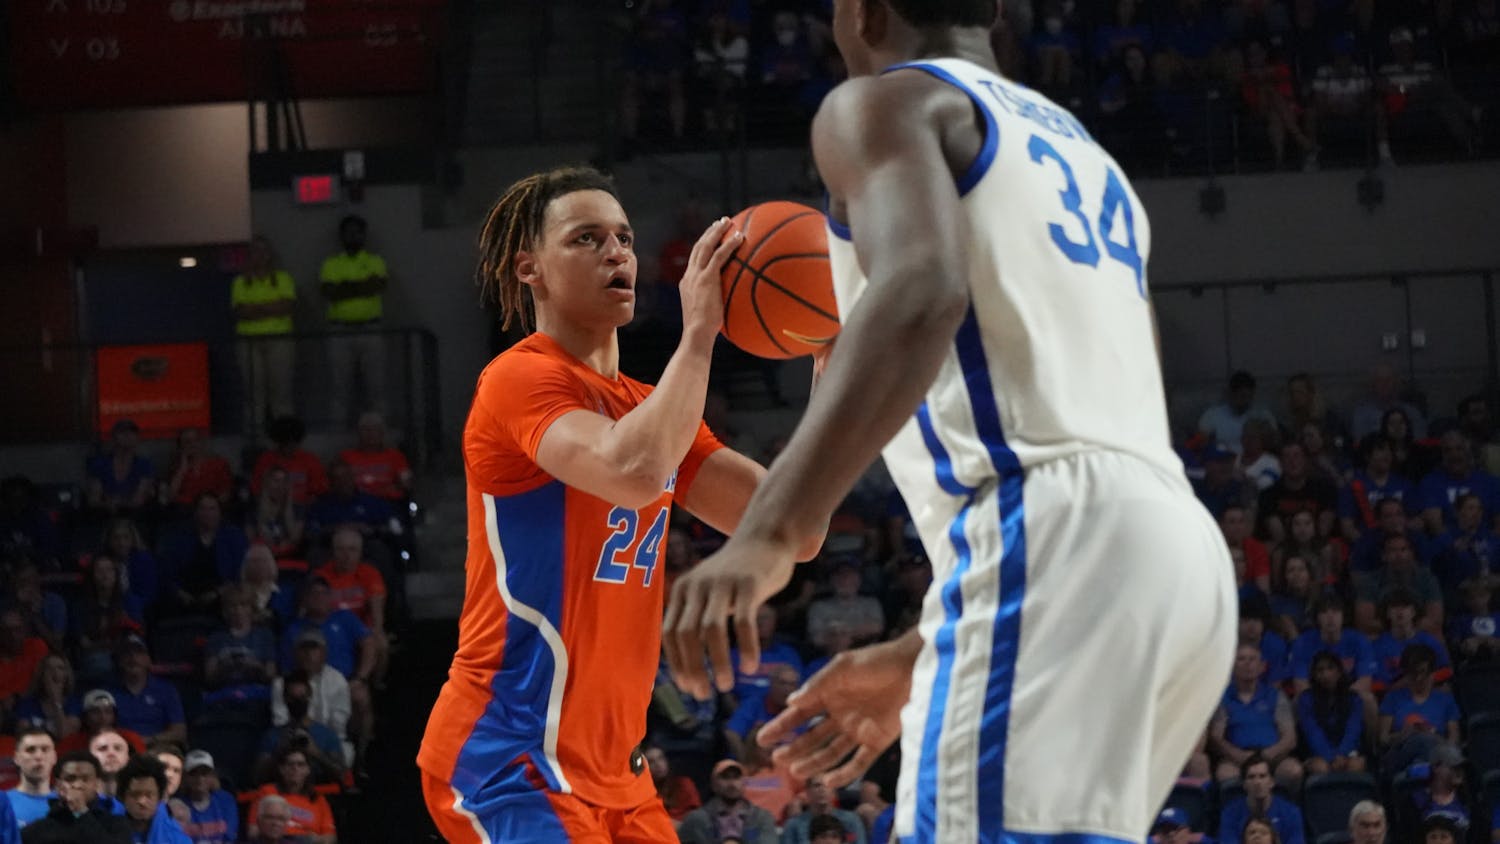 Florida guard Riley Kugel takes a jump shot in the Gators' 82-74 loss to the Kentucky Wildcats Wednesday, Feb. 22, 2023. Kugel finished the game with a career-high 24 points.